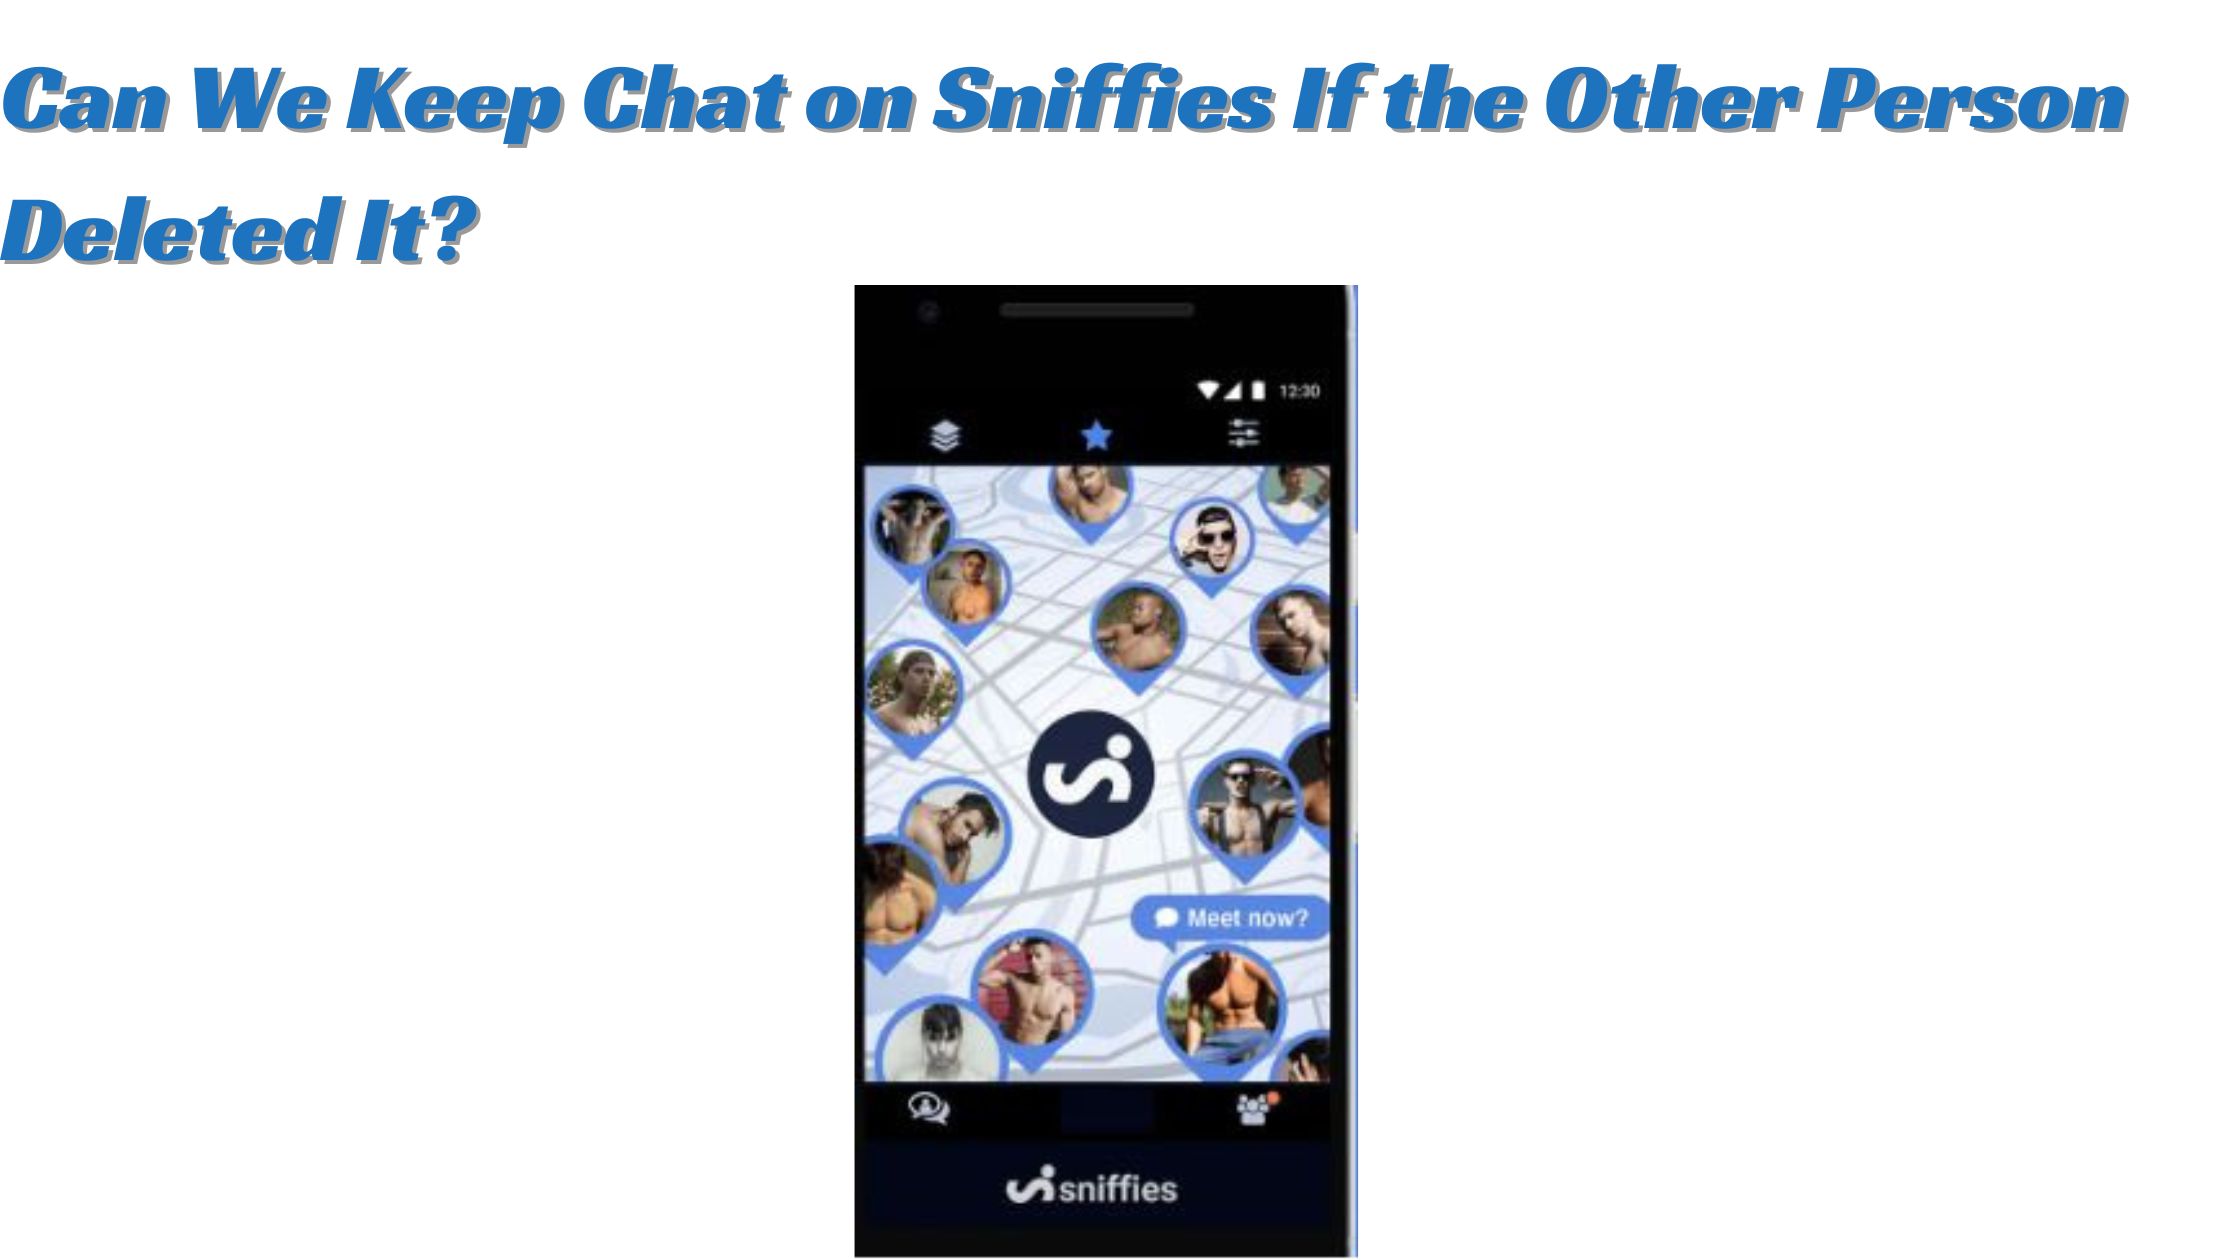 Can We Keep Chat on Sniffies If the Other Person Deleted It